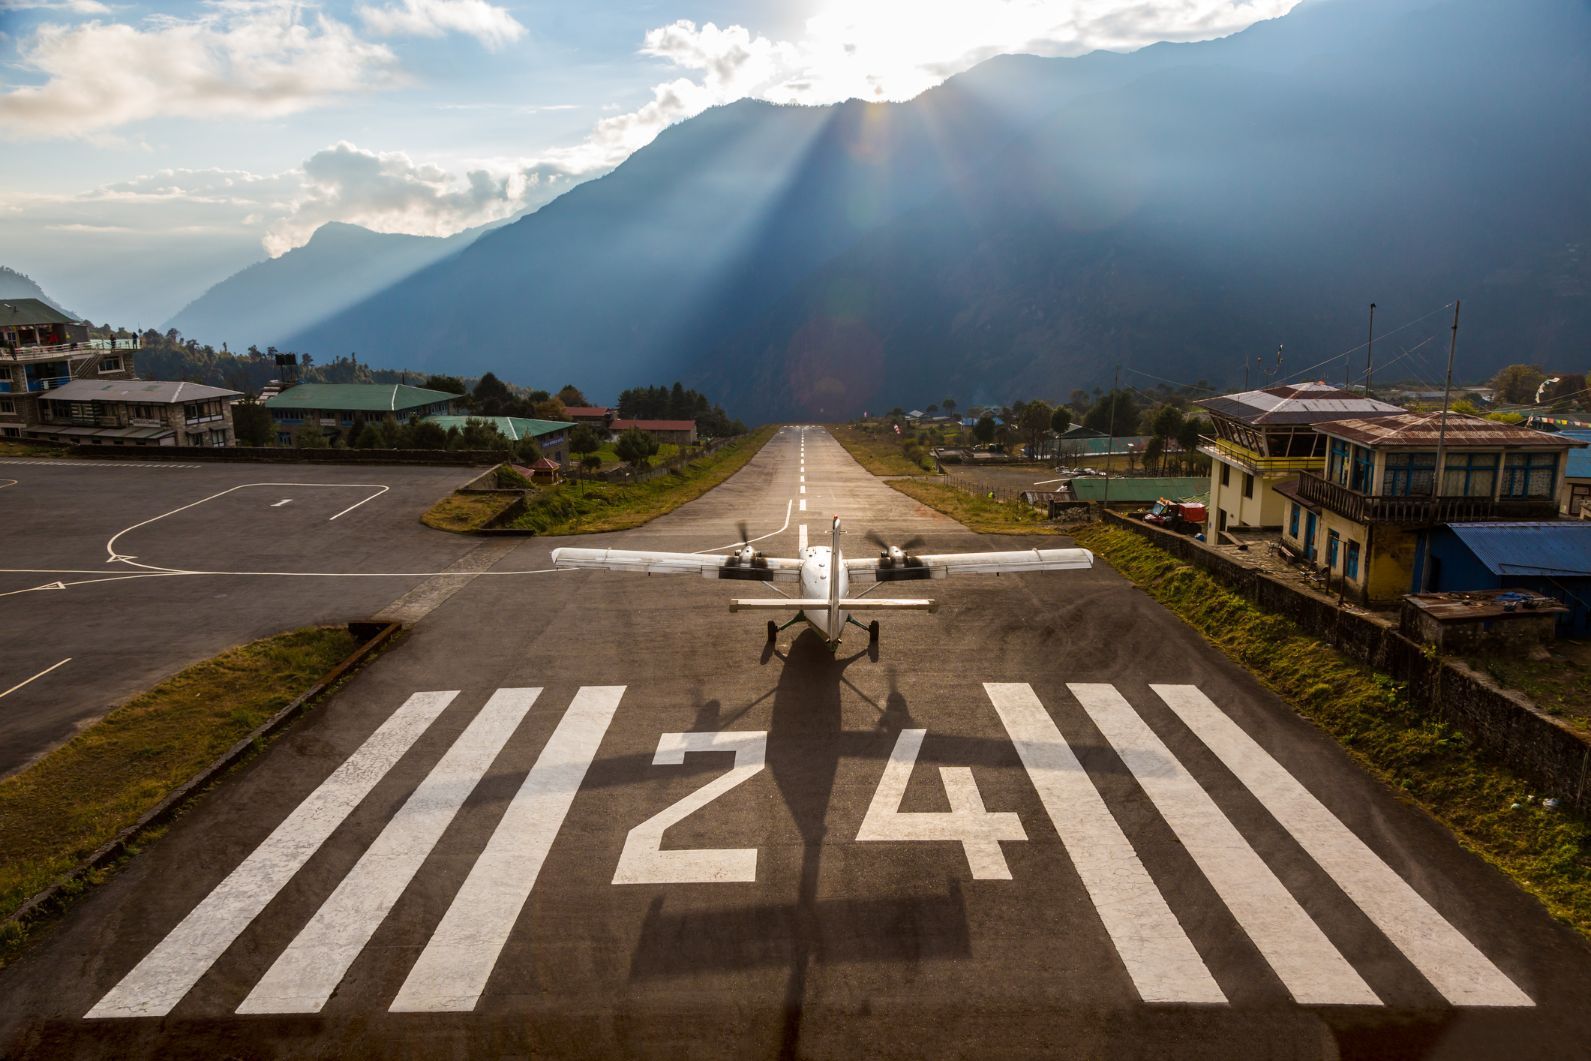 The remarkable Tenzing-Hillary Airport in Lukla in Nepal